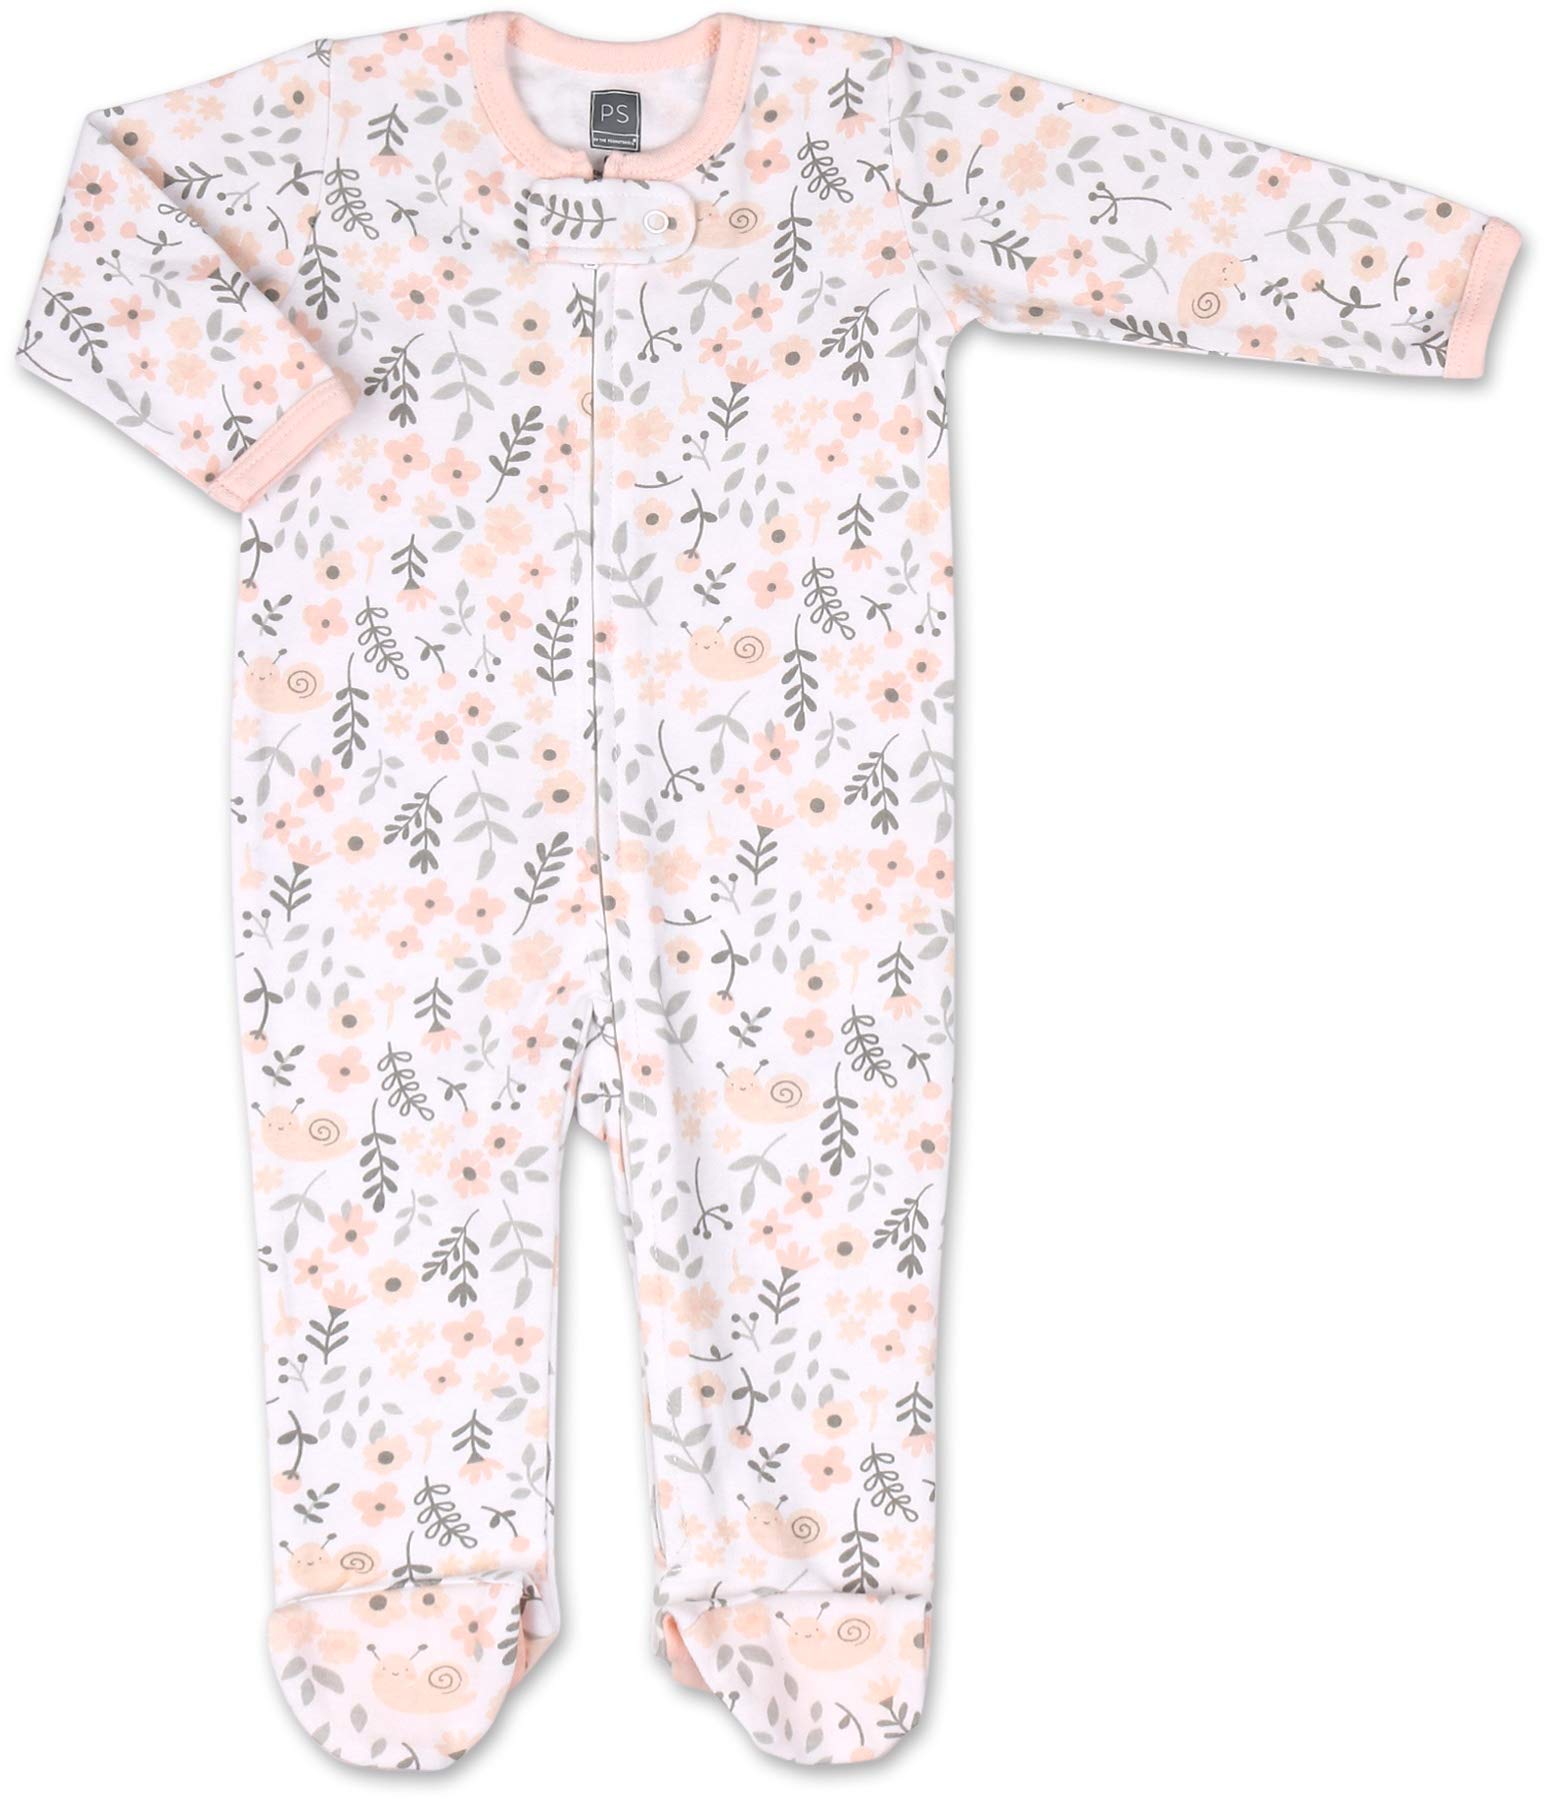 The Peanutshell Baby Sleeper Set for Baby Girls | 3 Pack in Pink Floral, Blush, & Stars | Newborn to 9M Footed Girl Pajamas